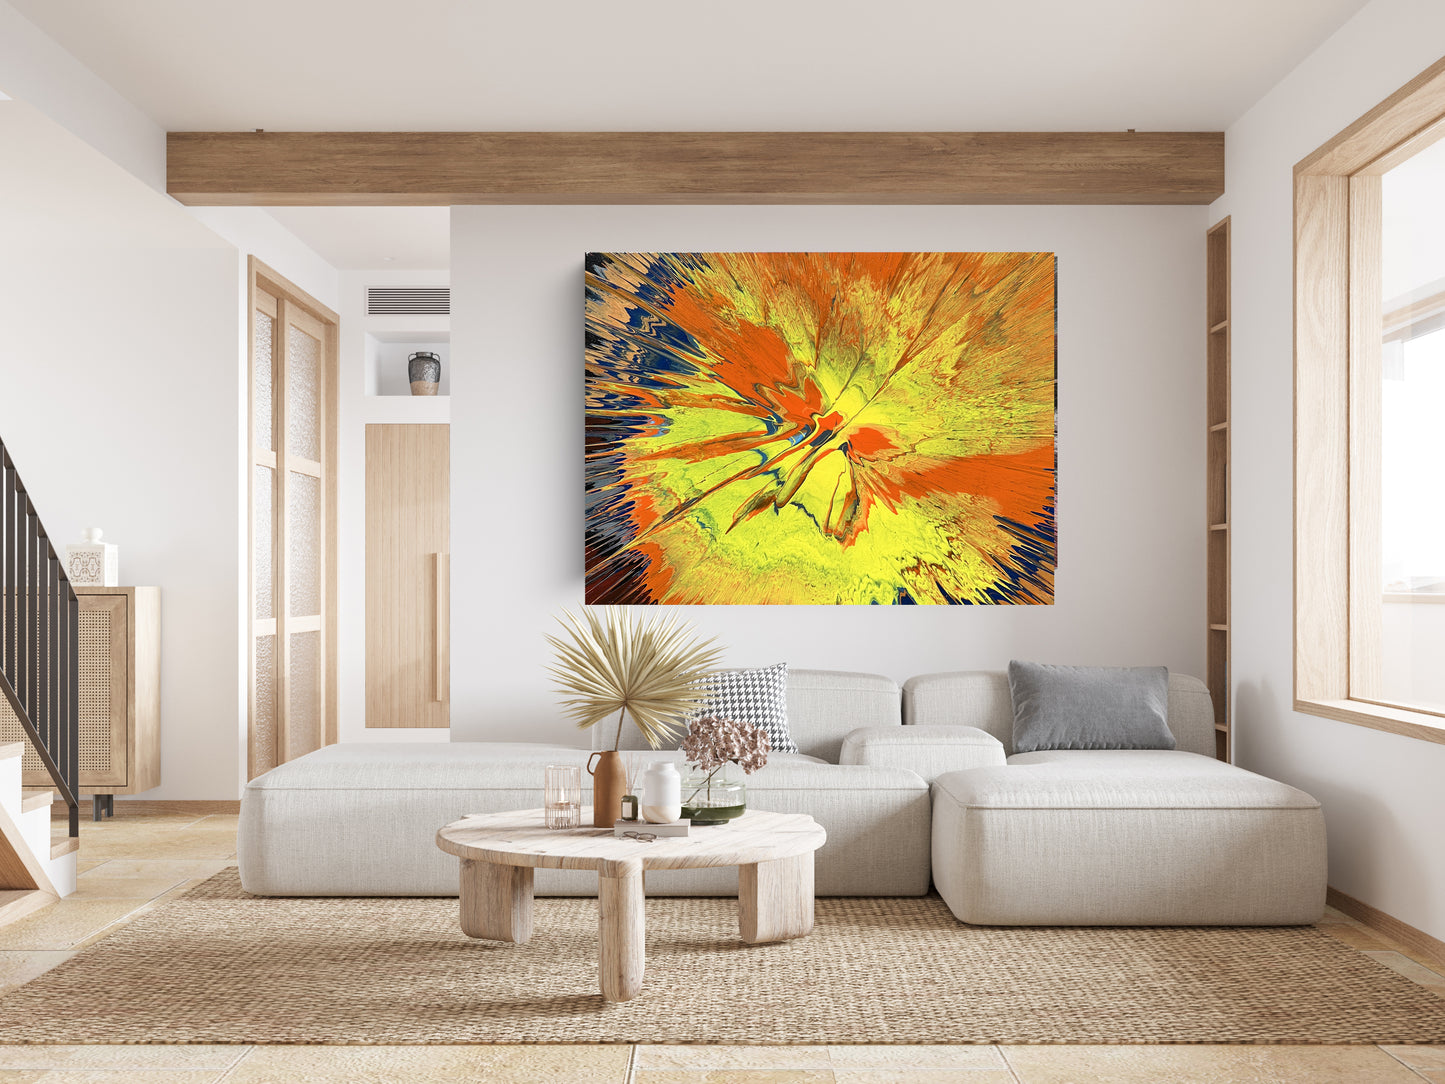 Large Spin, Wall Art on Canvas, Summer Abstract, Spin Painting, Large Home Decor, Acrylic Abstract, Spin Art on Canvas, Office Spin Decor